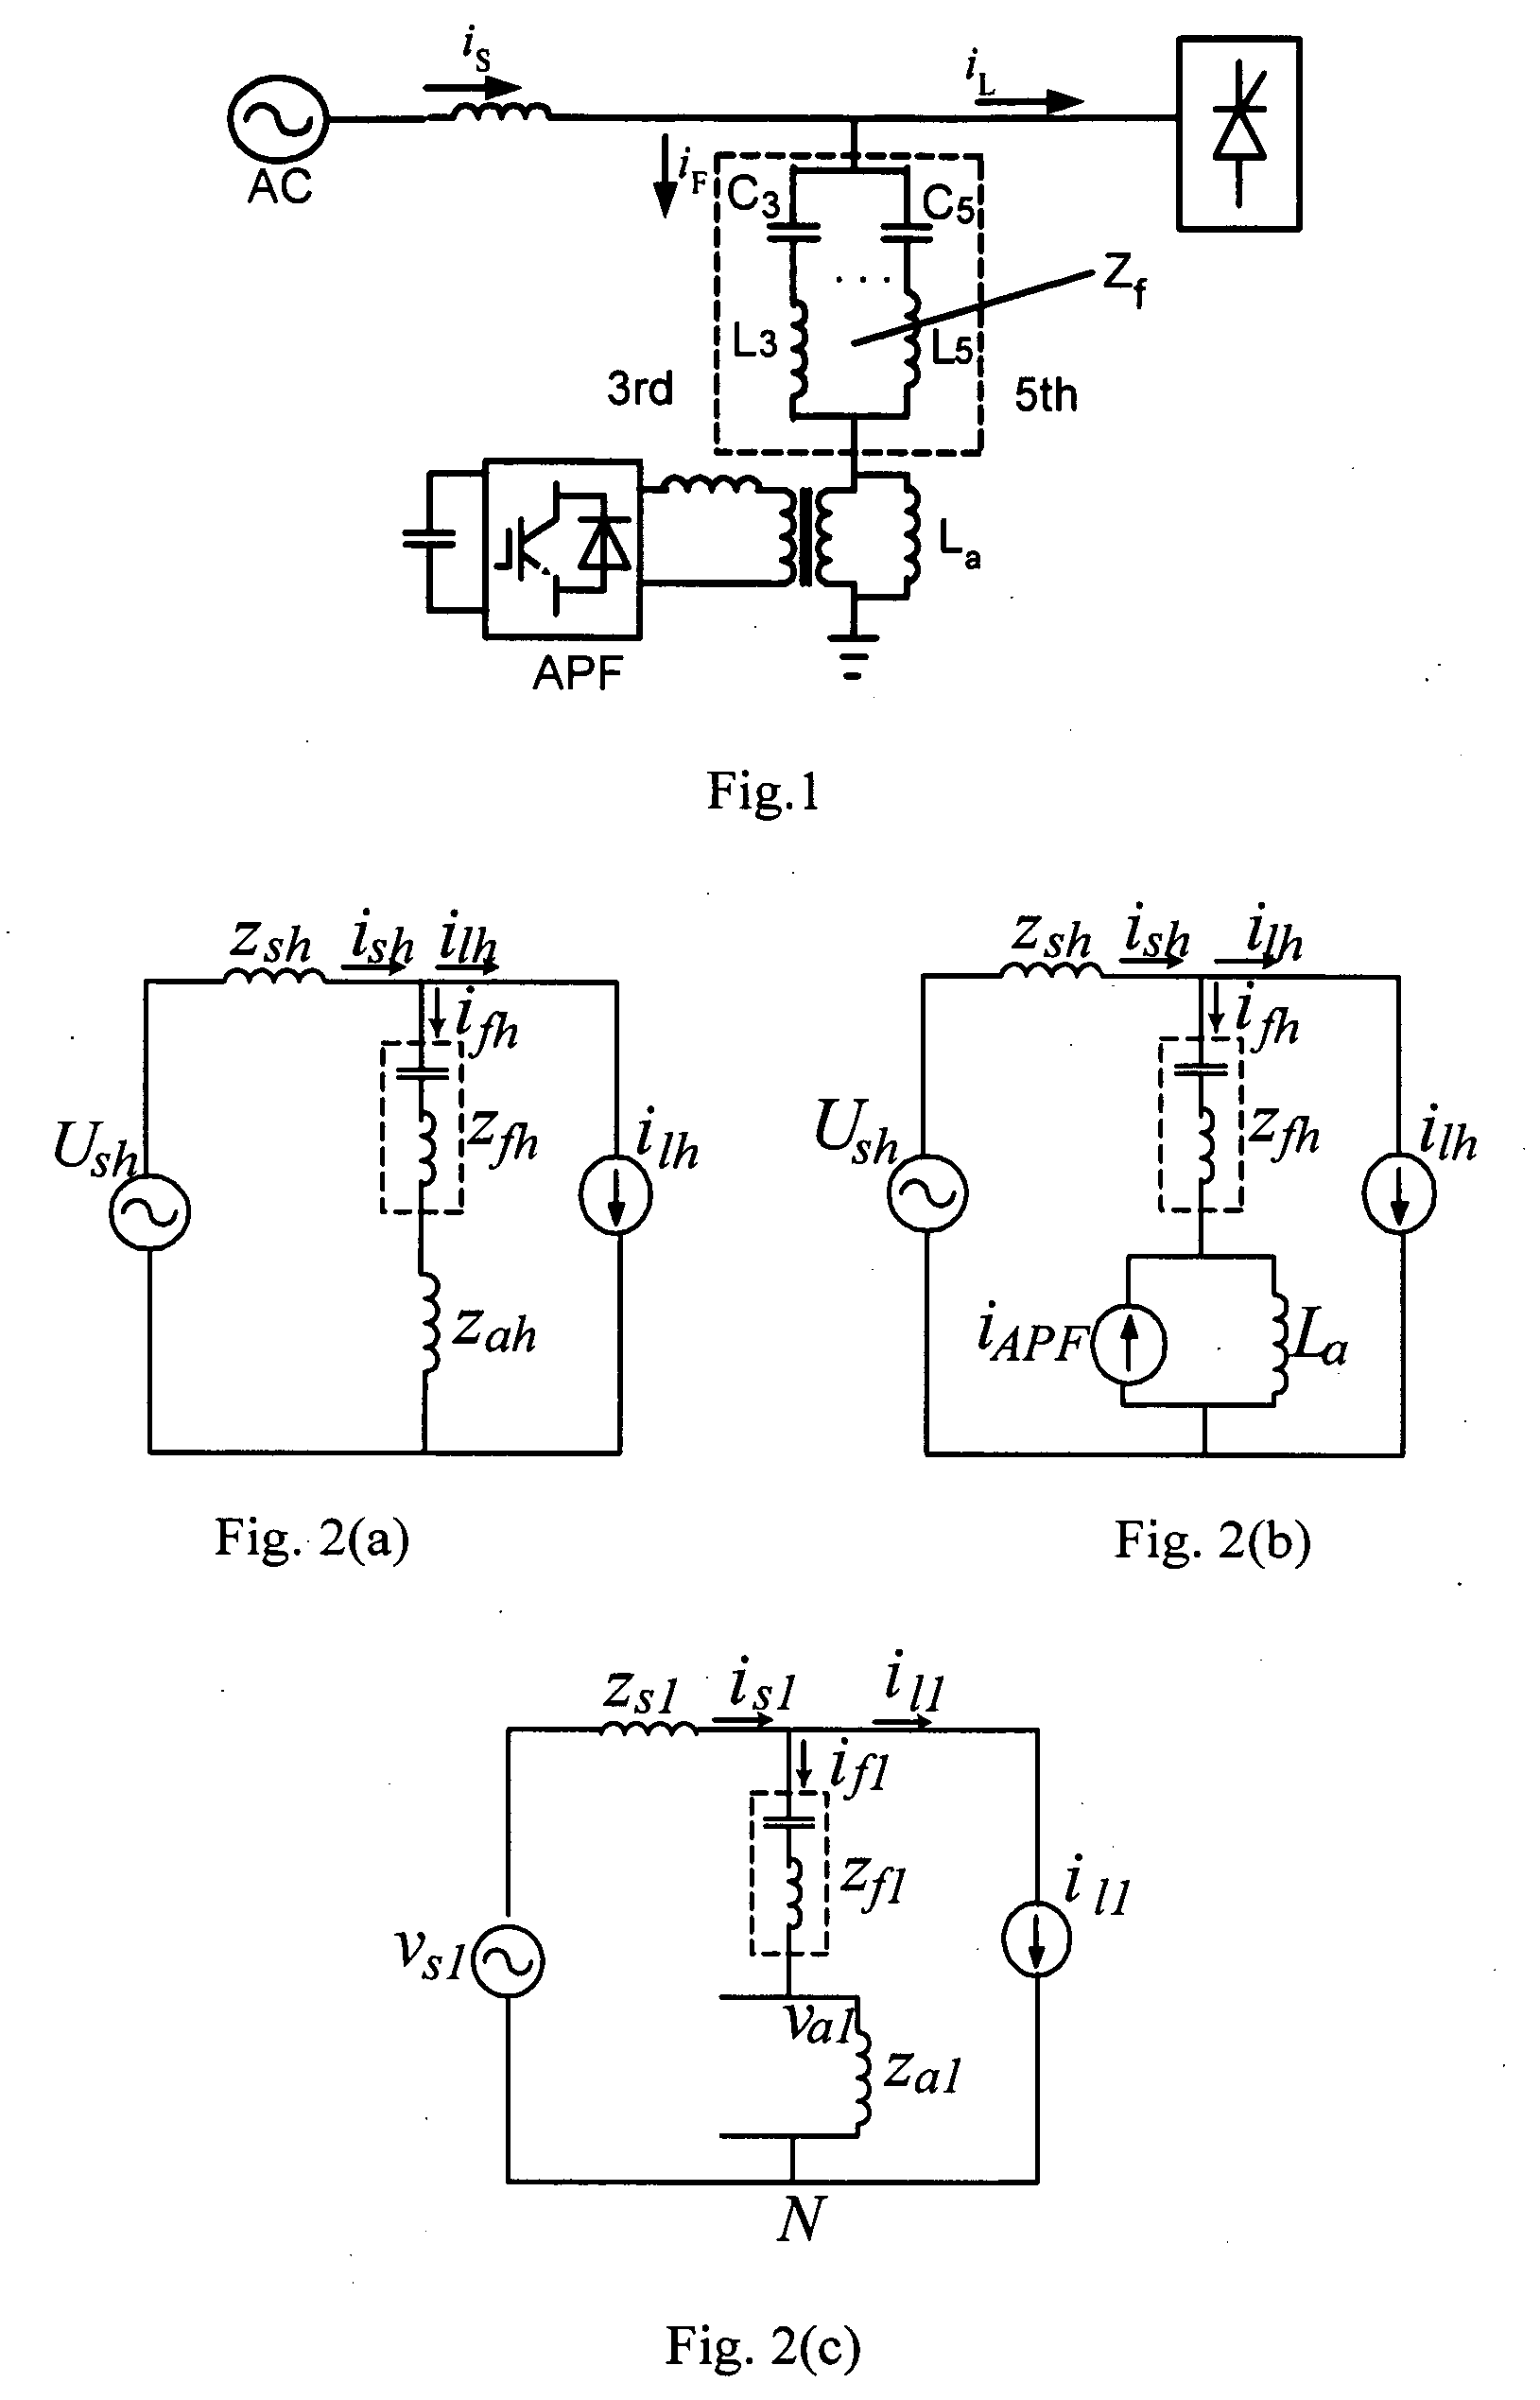 Hybrid parallel active power filter for electrified railway system